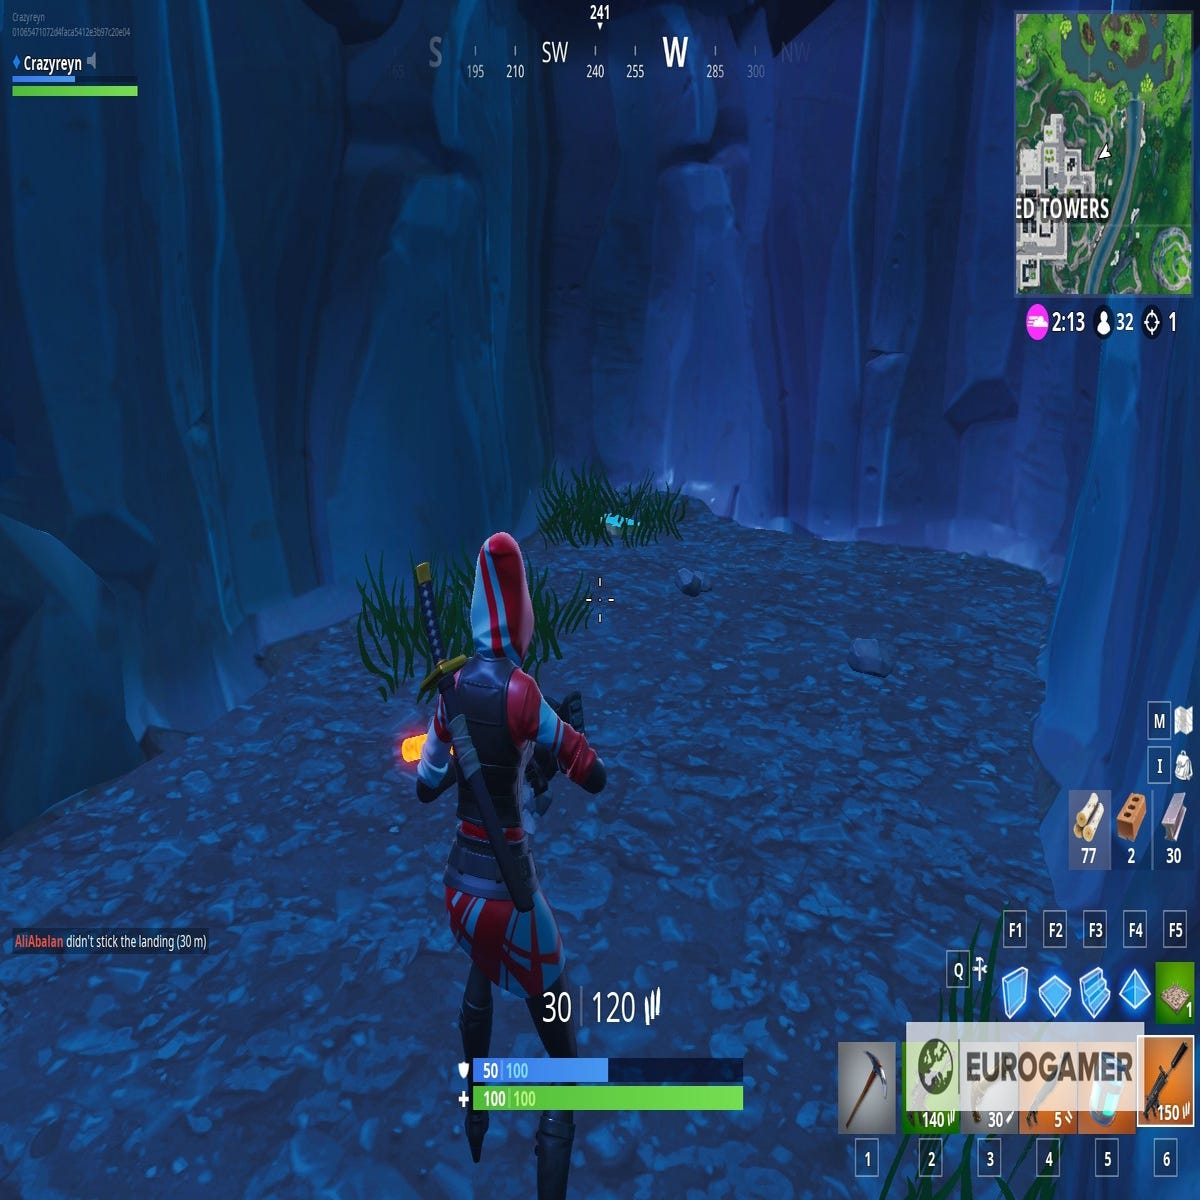 Fortnite Jigsaw Puzzle locations - where to search Jigsaw Puzzle